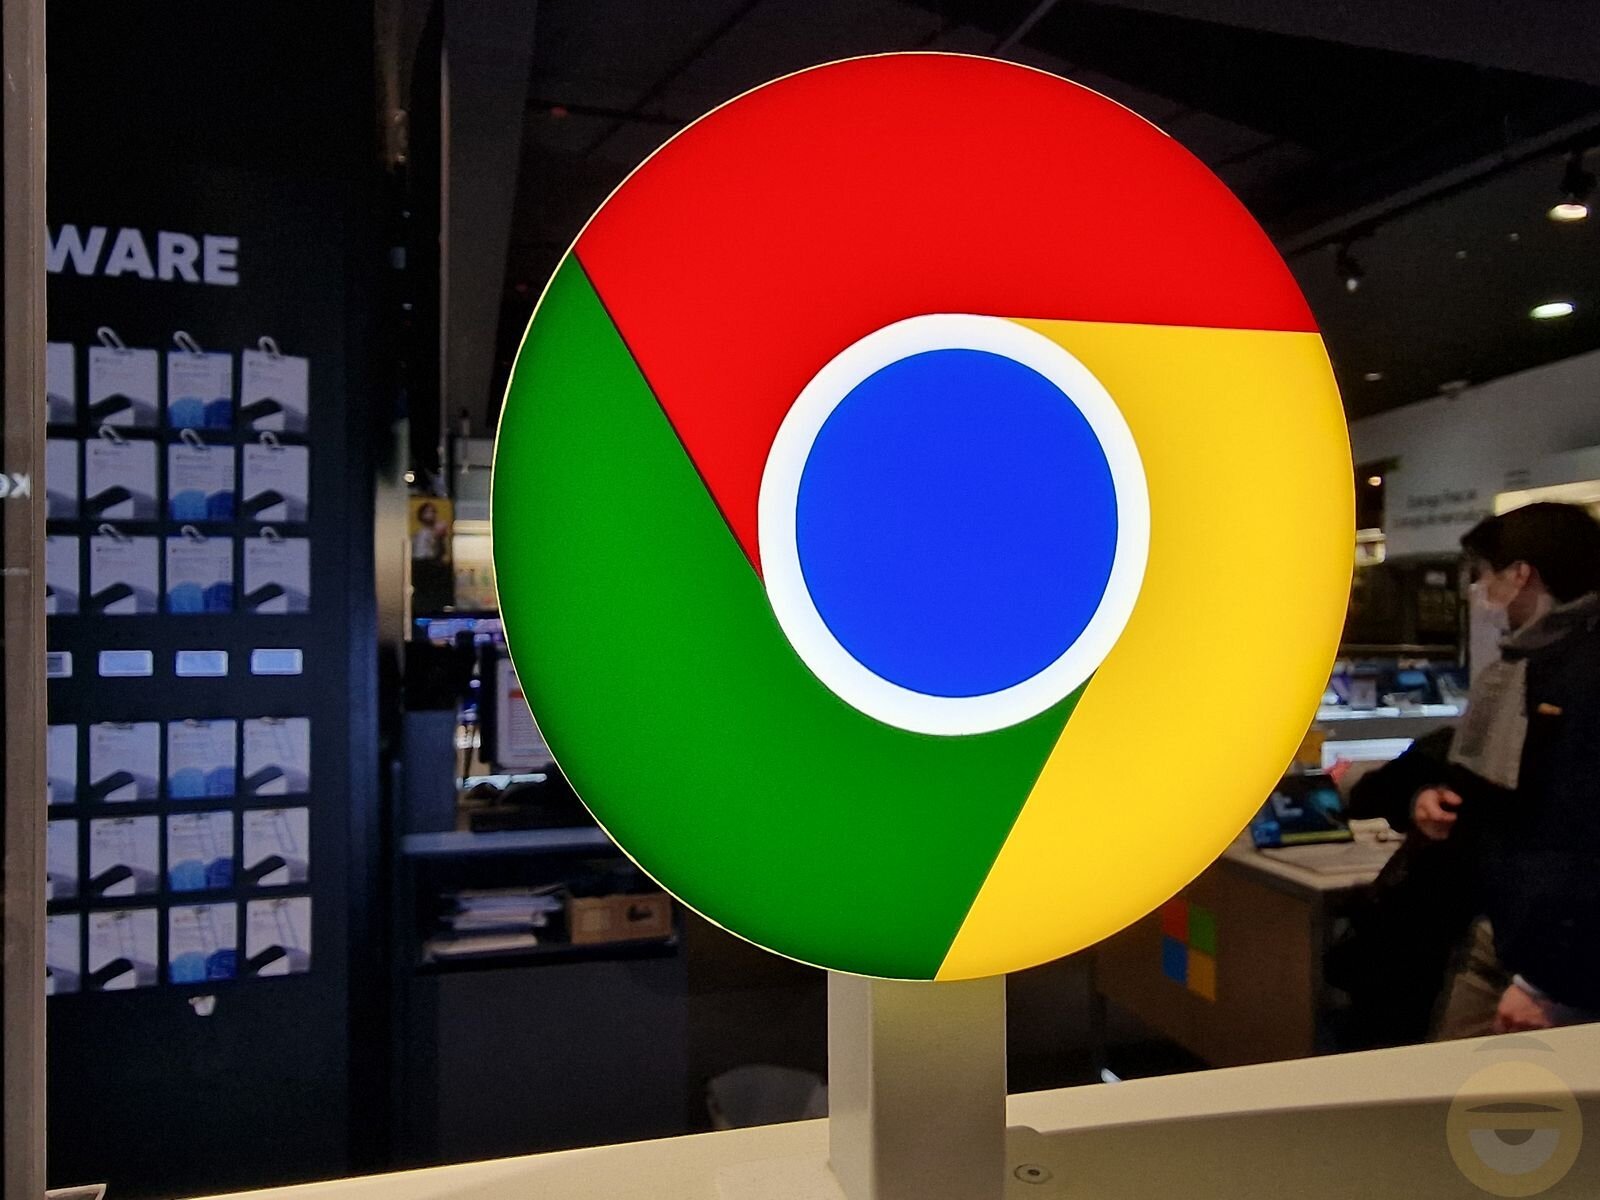 Google now admits it “can collect data in Chrome's incognito mode” – Google